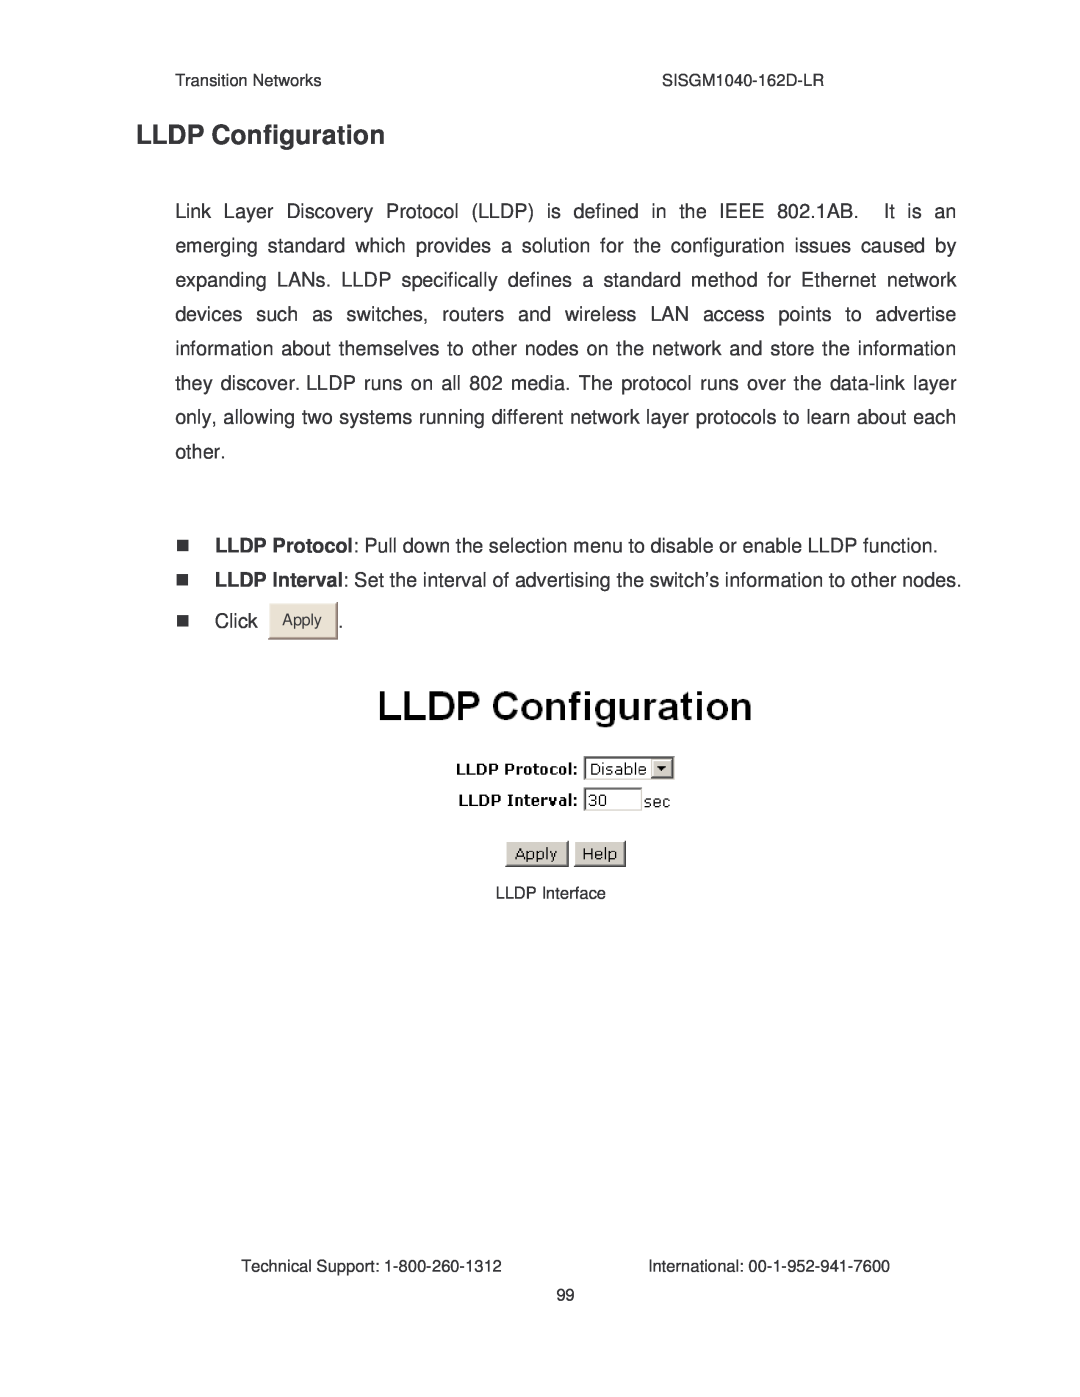 Transition Networks SISGM1040-162D manual LLDP Configuration 